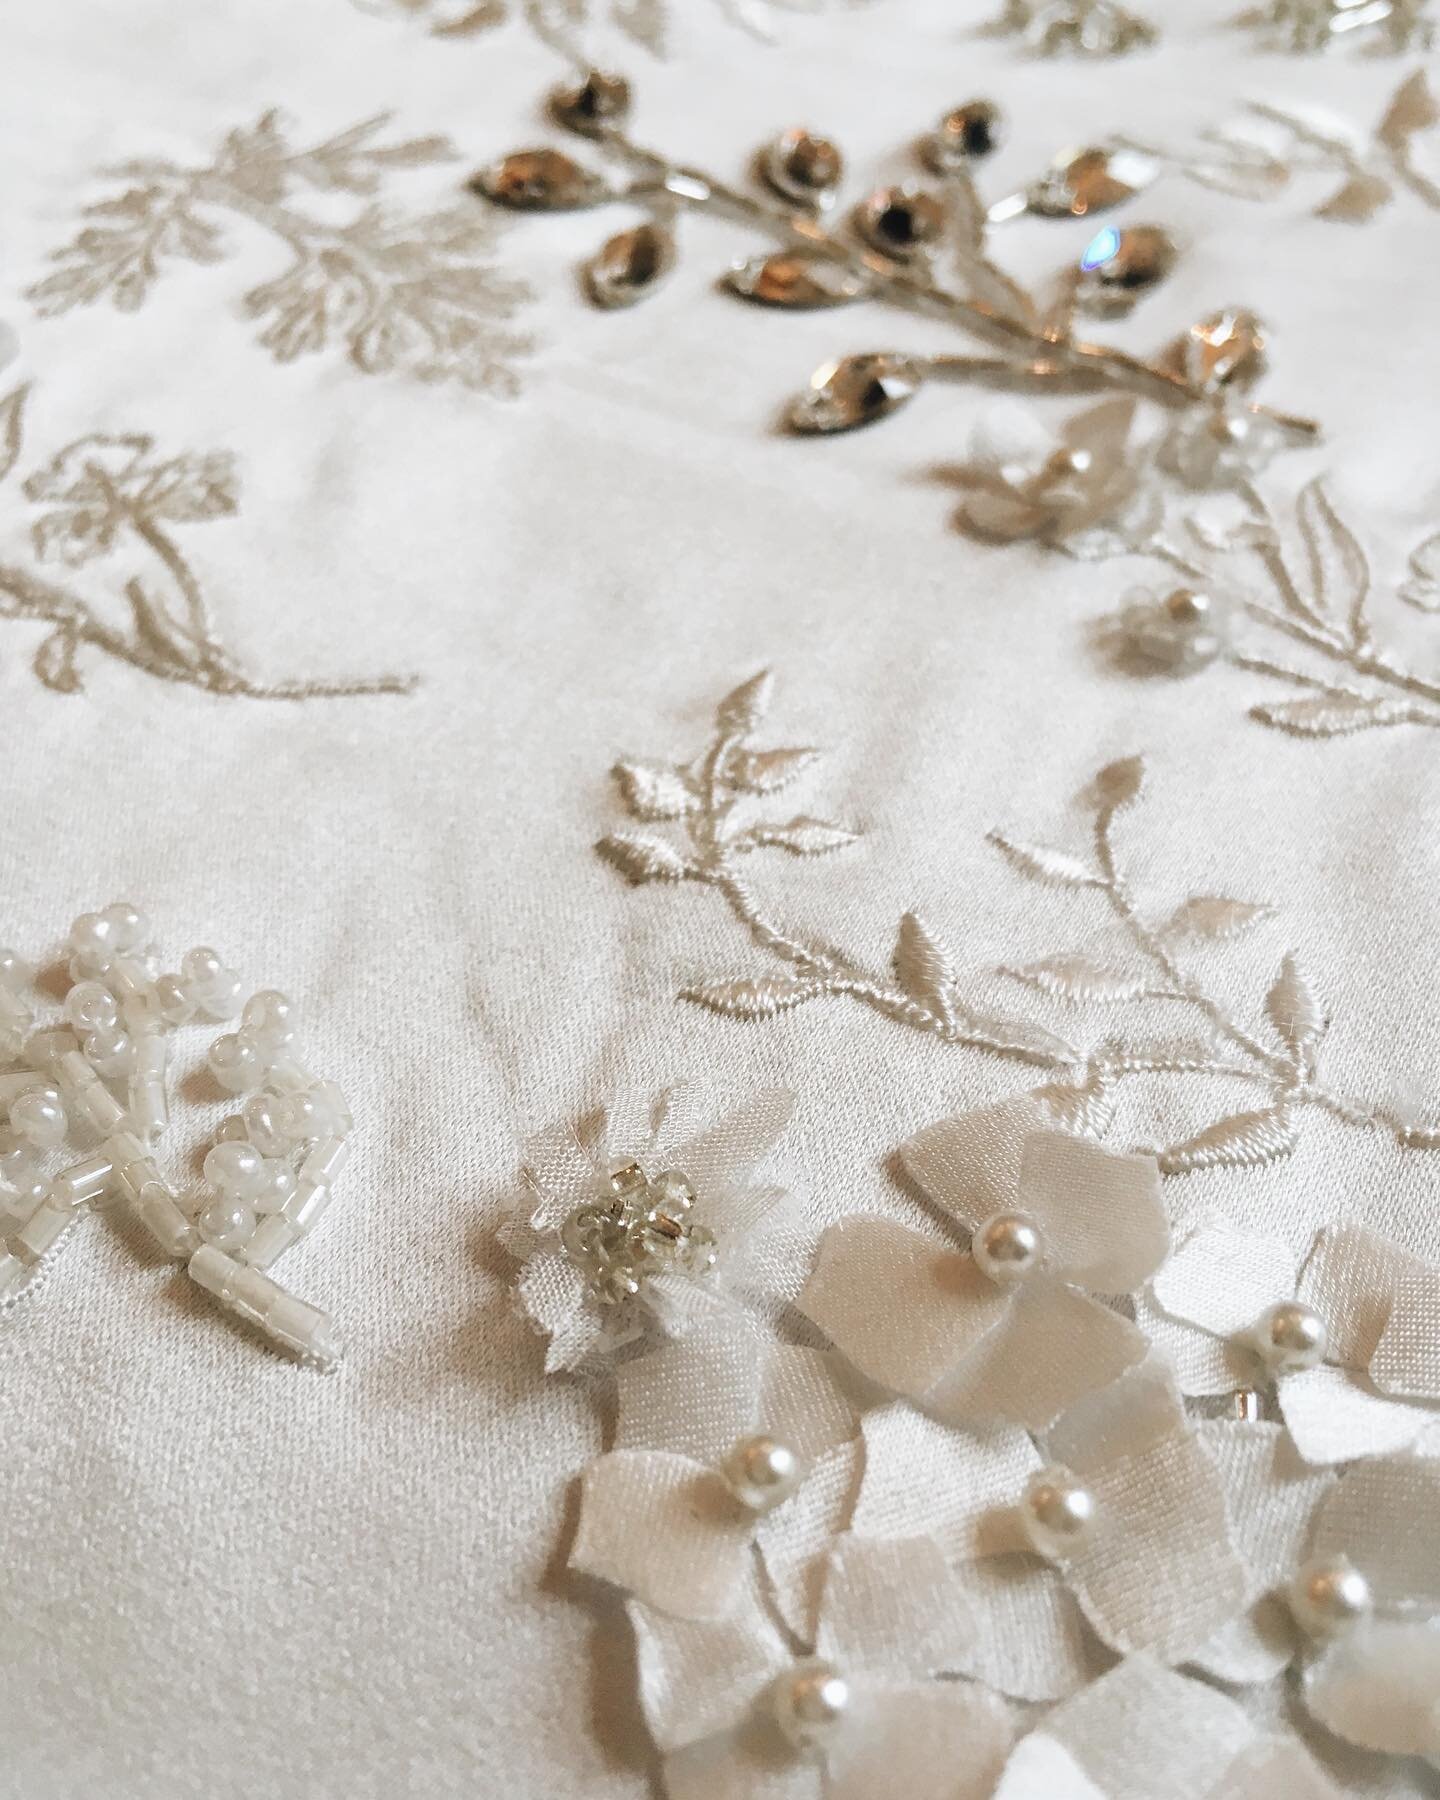 E M B E L L I S H M E N T

As part of my bespoke service, I can design and create embellishments for your veil. They are all crafted using couture techniques and add beautiful texture - silk petals, delicate pearls, subtle beads or statement sparkles